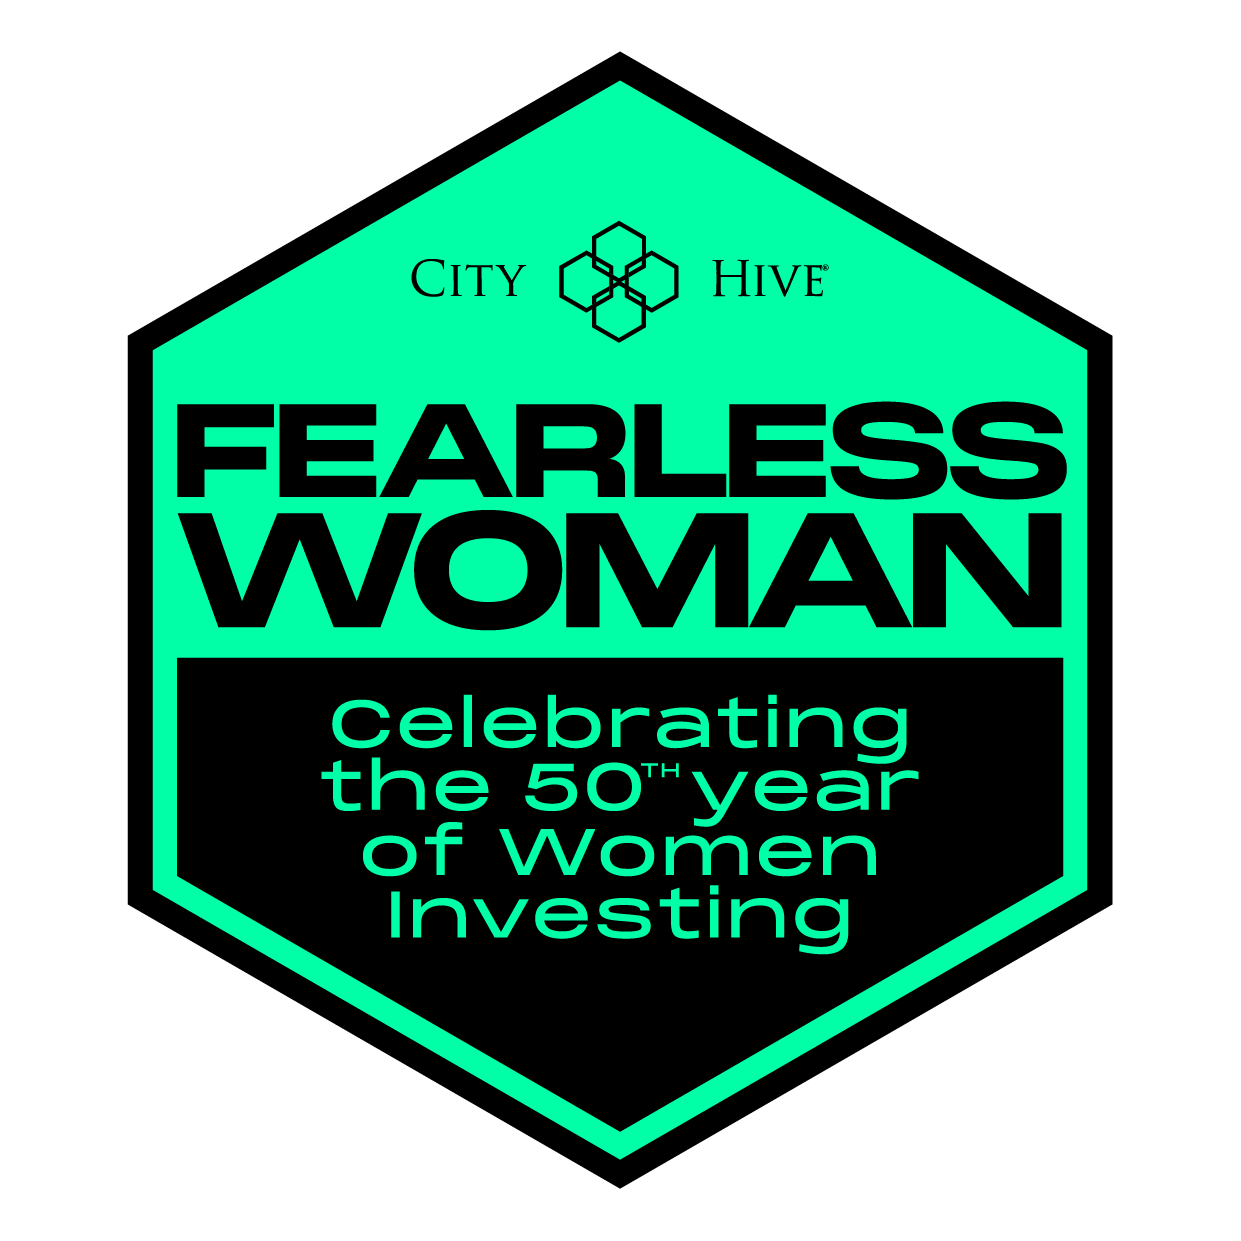 Fearless Woman City Hive